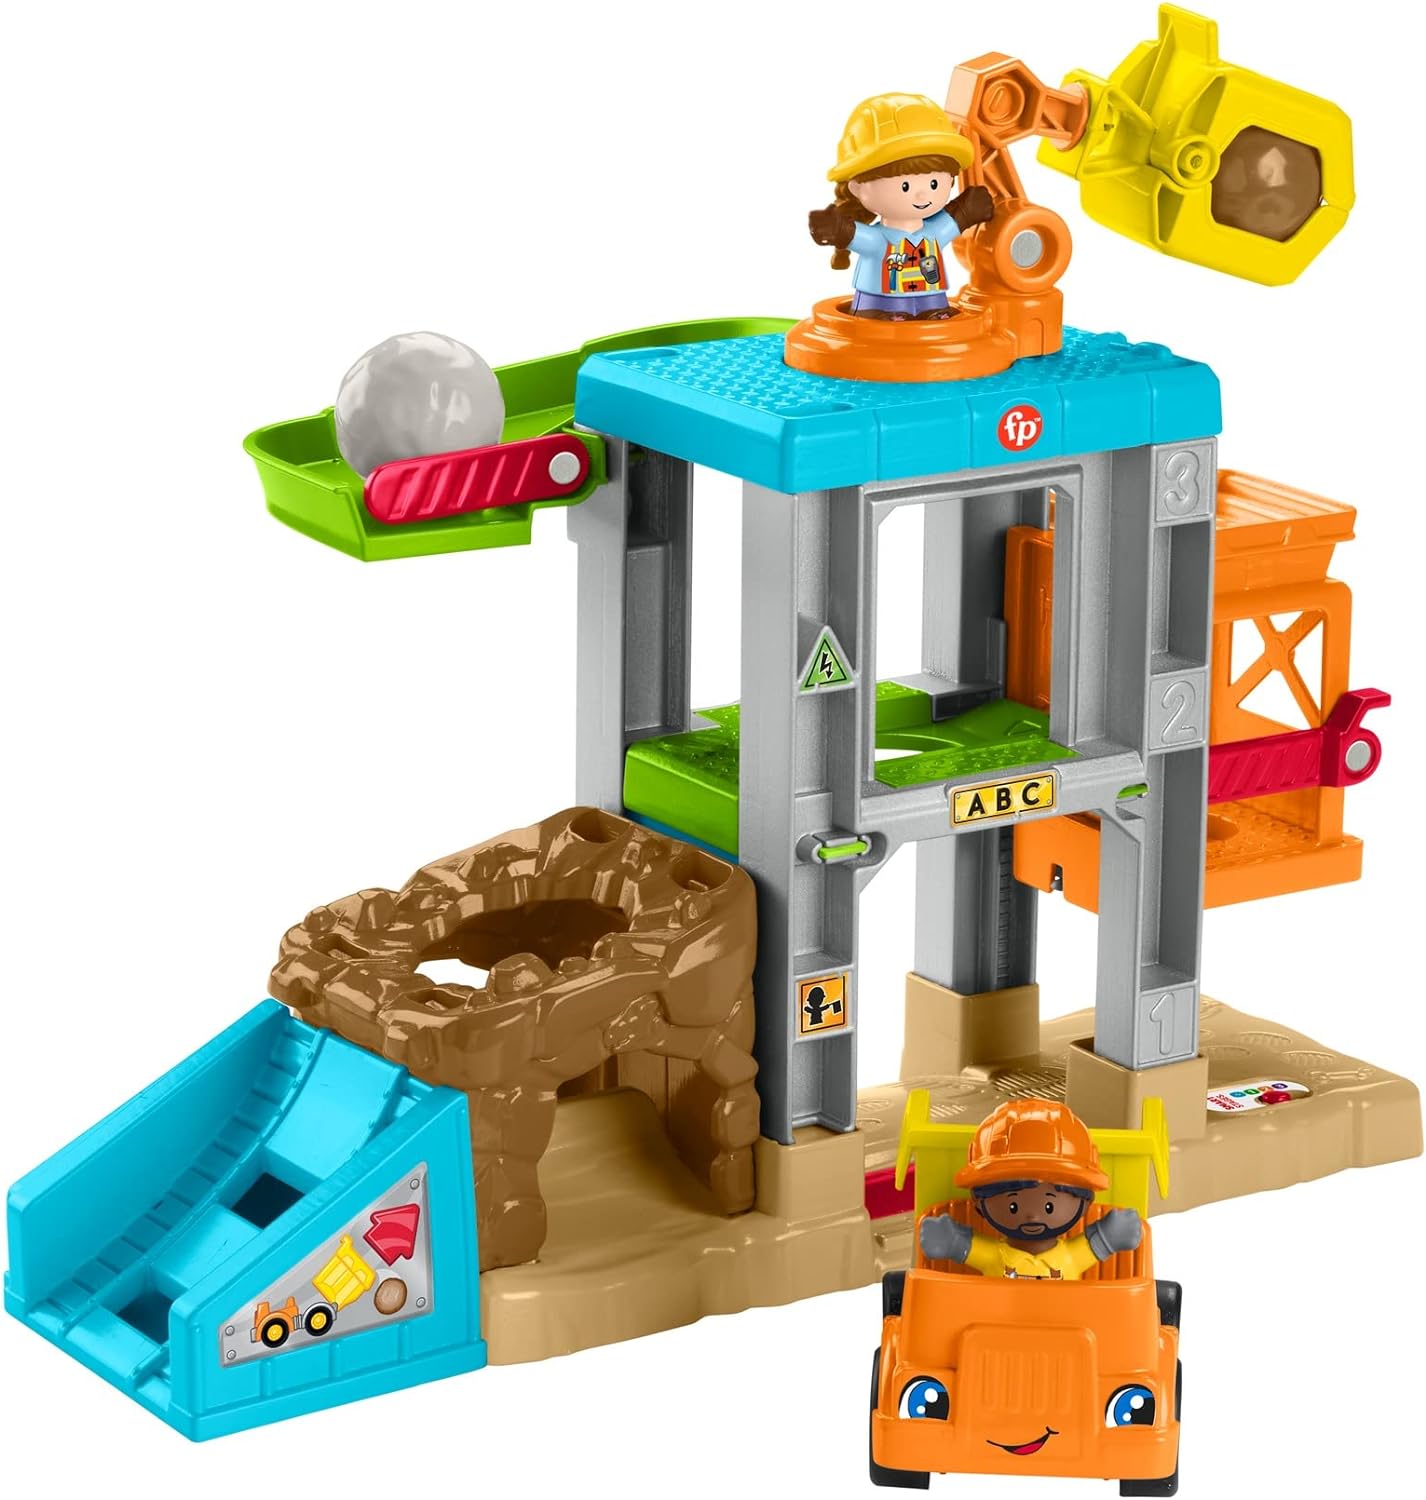 Fisher-Price Little People Load Up Construction Site